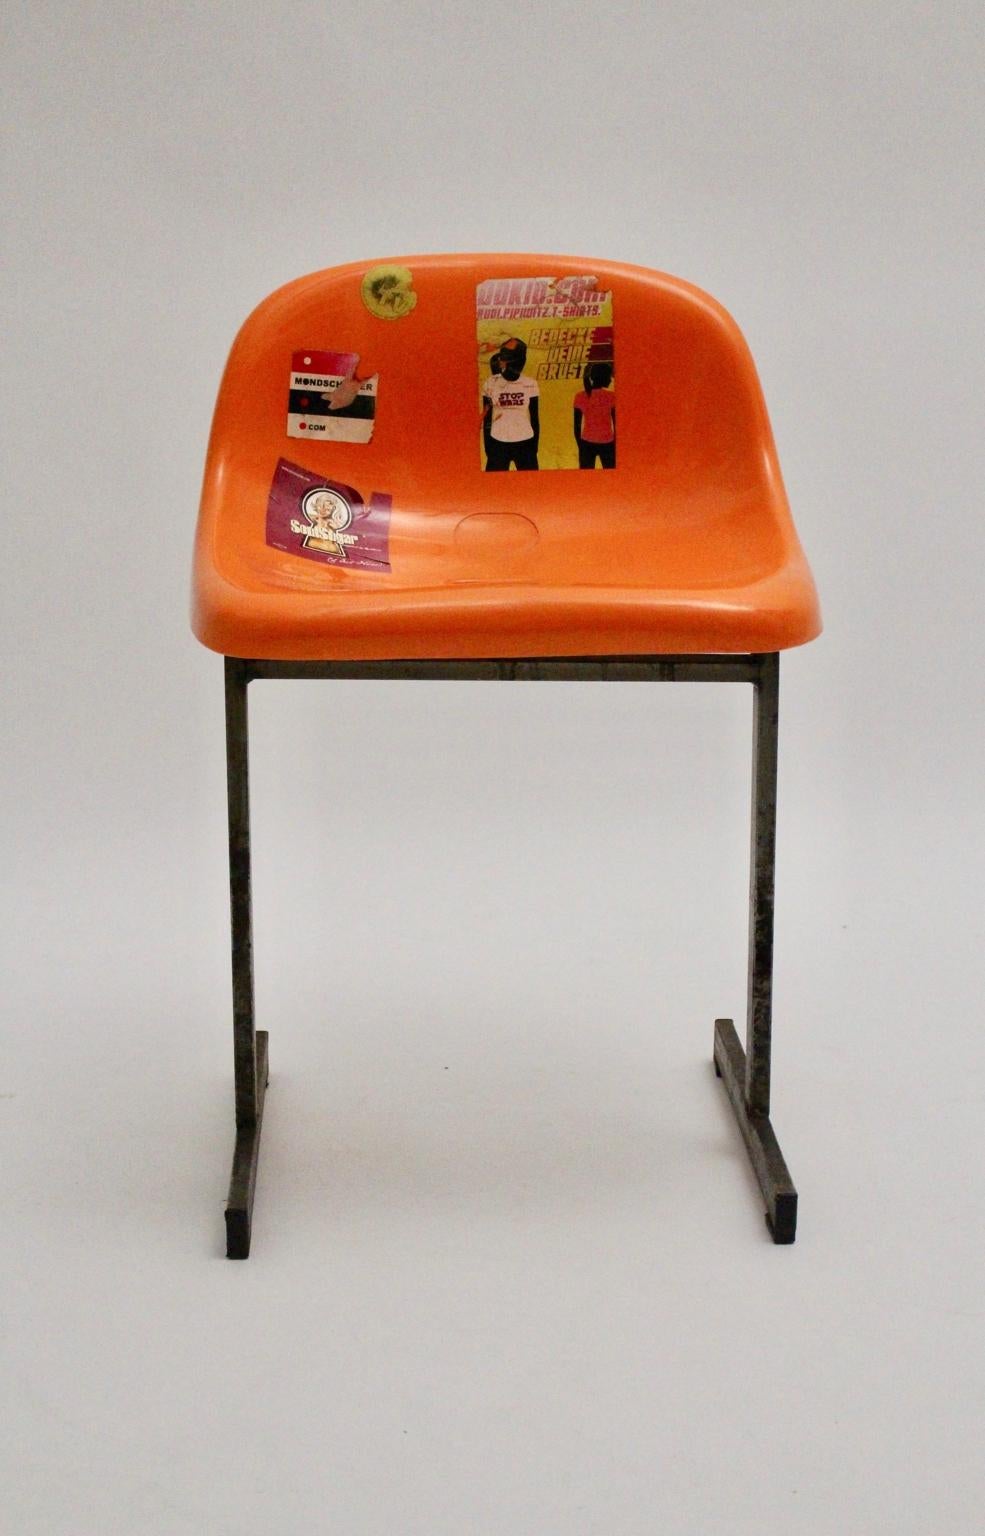 Pop Art vintage plastic metal chair from a sports stadium in Vienna shows a steel frame and an orange plastic seat shell. The seat shell is plastered with many stickers.
Stable and sturdy while the surface of the chair shows signs of use and the